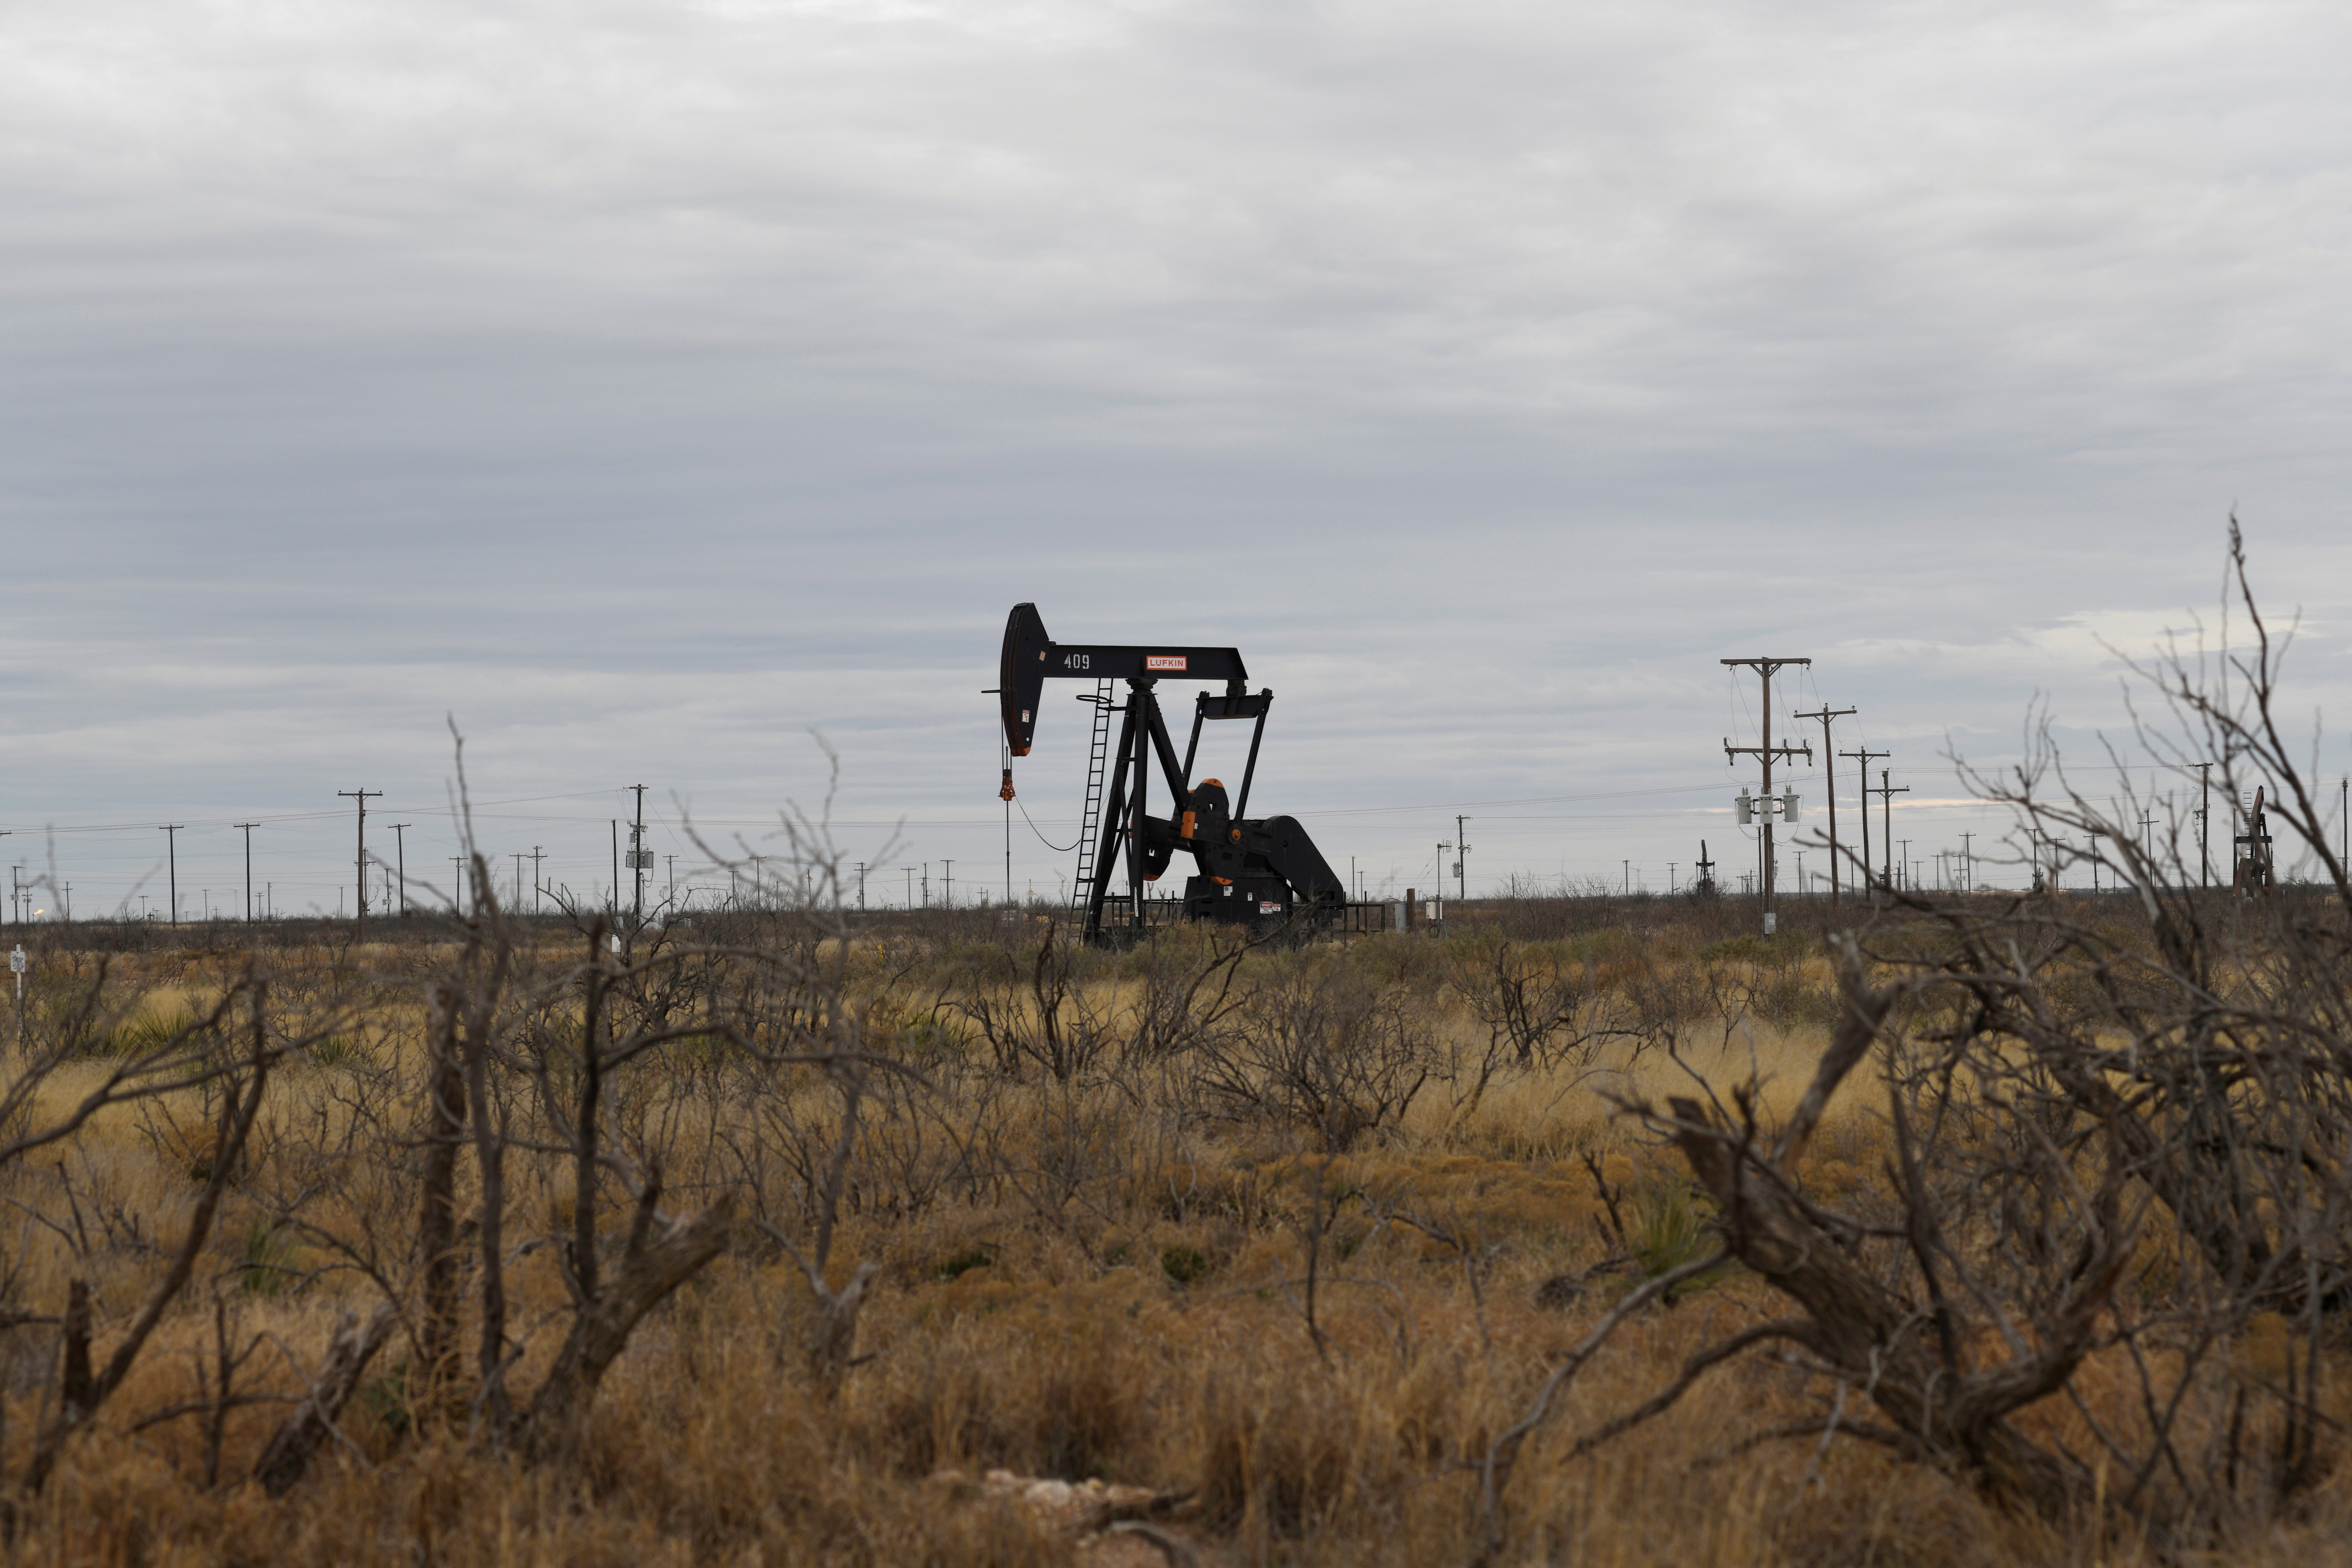 A pump jack operates in the Permian Basin oil and natural gas production area near Odessa